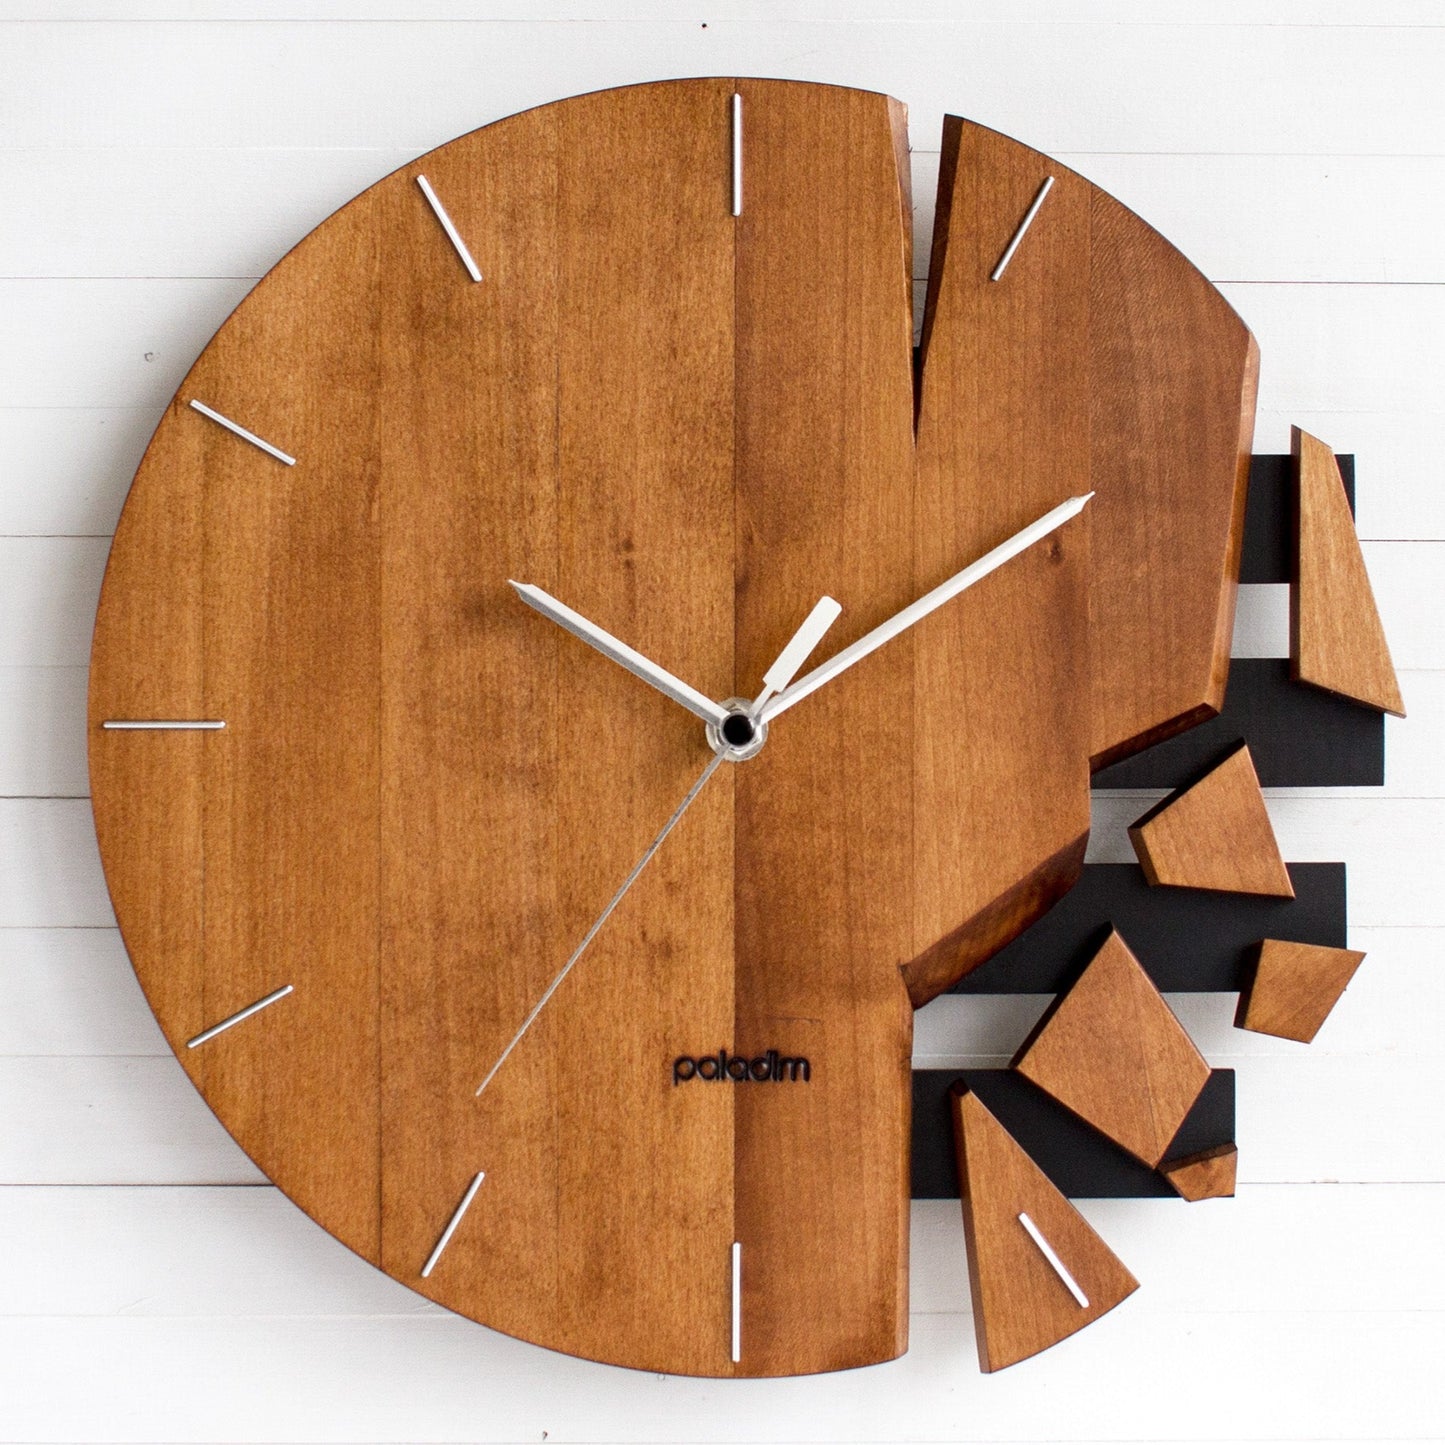 VREME shattered wall clock